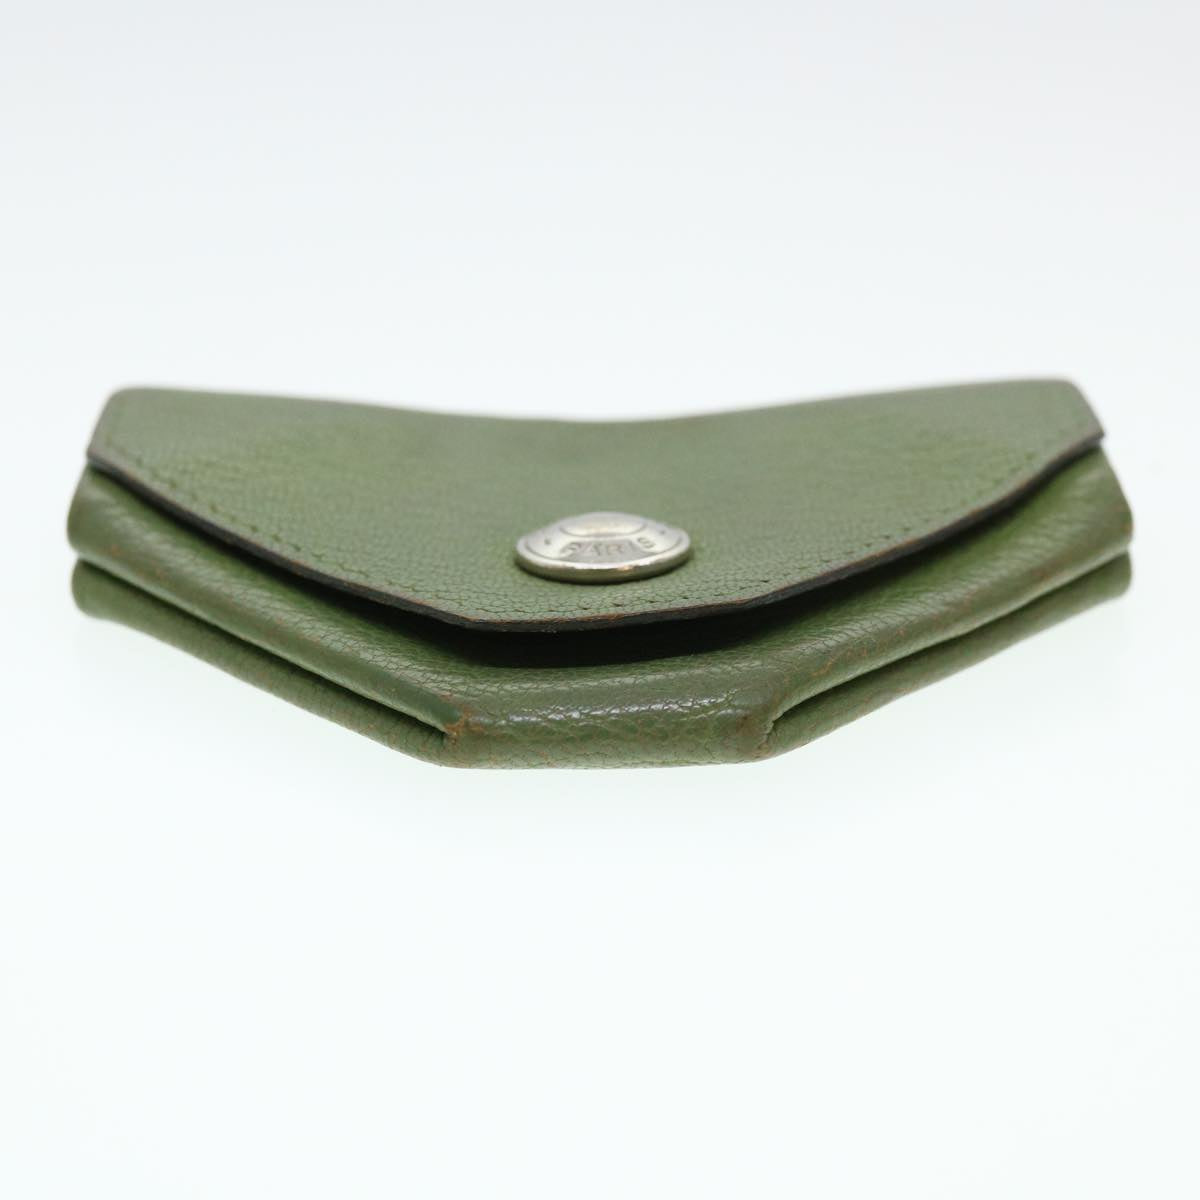 HERMES Le Van Cator Coin Purse Leather Green Auth bs4656